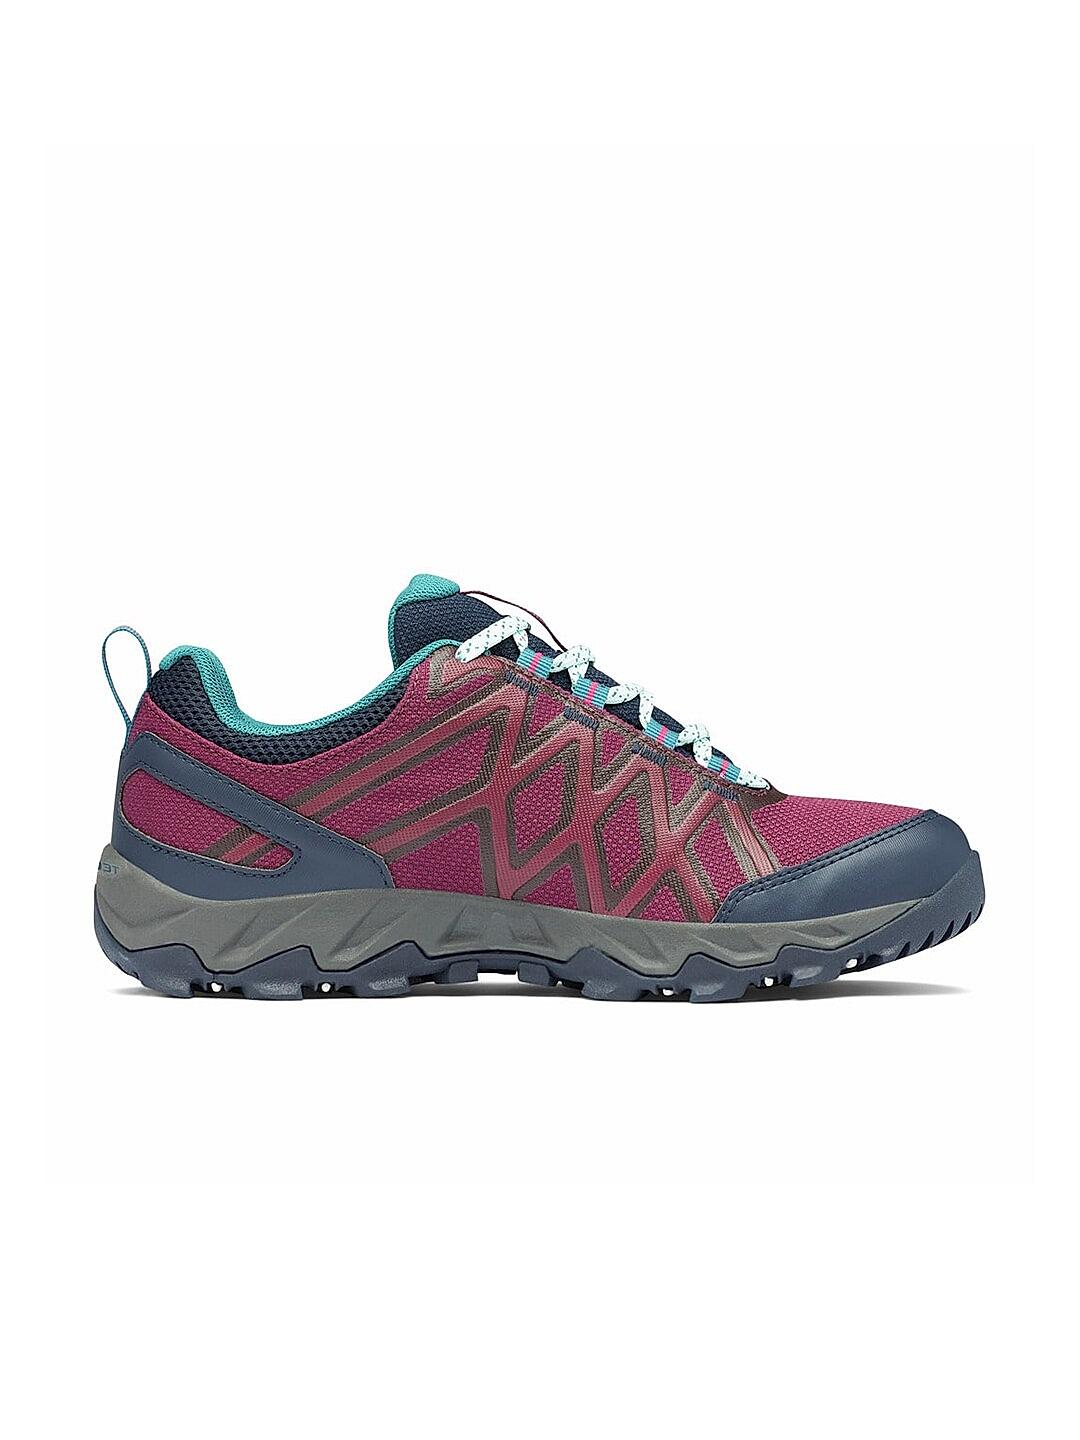 Columbia Womens Peakfreak X2 Outdry Hiking Shoes